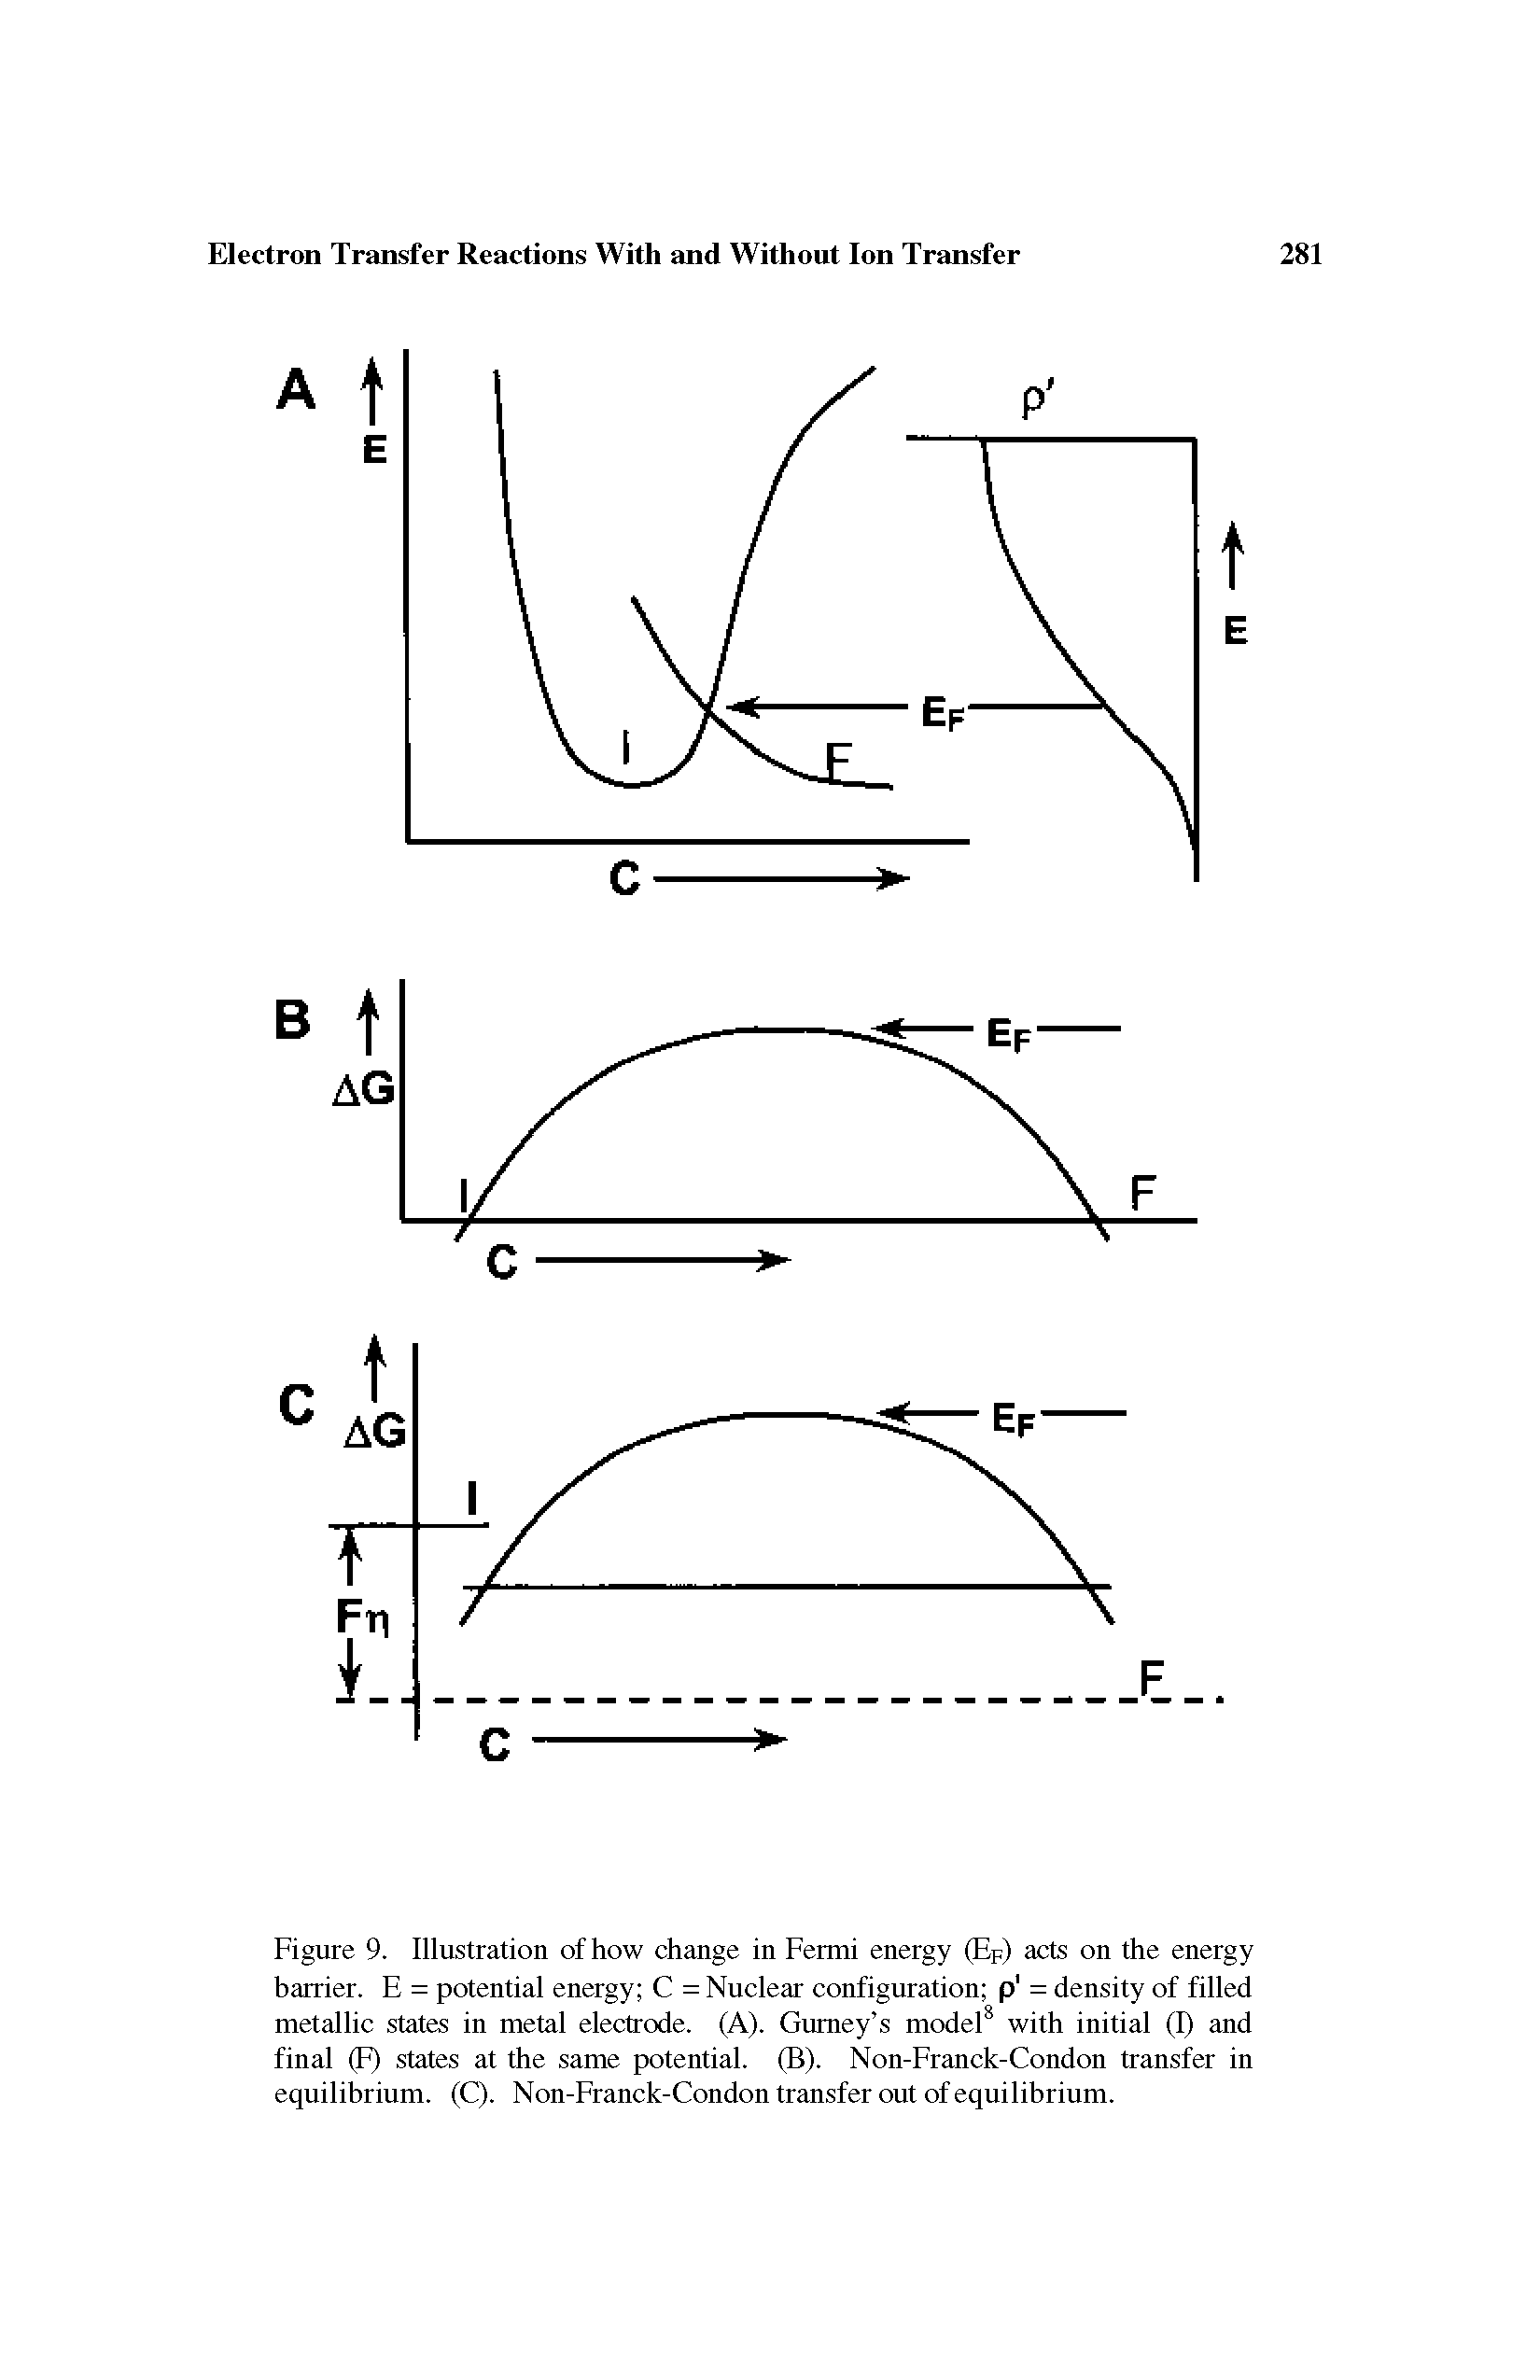 Figure 9. Illustration of how change in Fermi energy (Ep) acts on the energy barrier. E = potential energy C = Nuclear configuration p1 = density of filled metallic states in metal electrode. (A). Gurney s model8 with initial (I) and final (F) states at the same potential. (B). Non-Franck-Condon transfer in equilibrium. (C). Non-Franck-Condon transfer out of equilibrium.